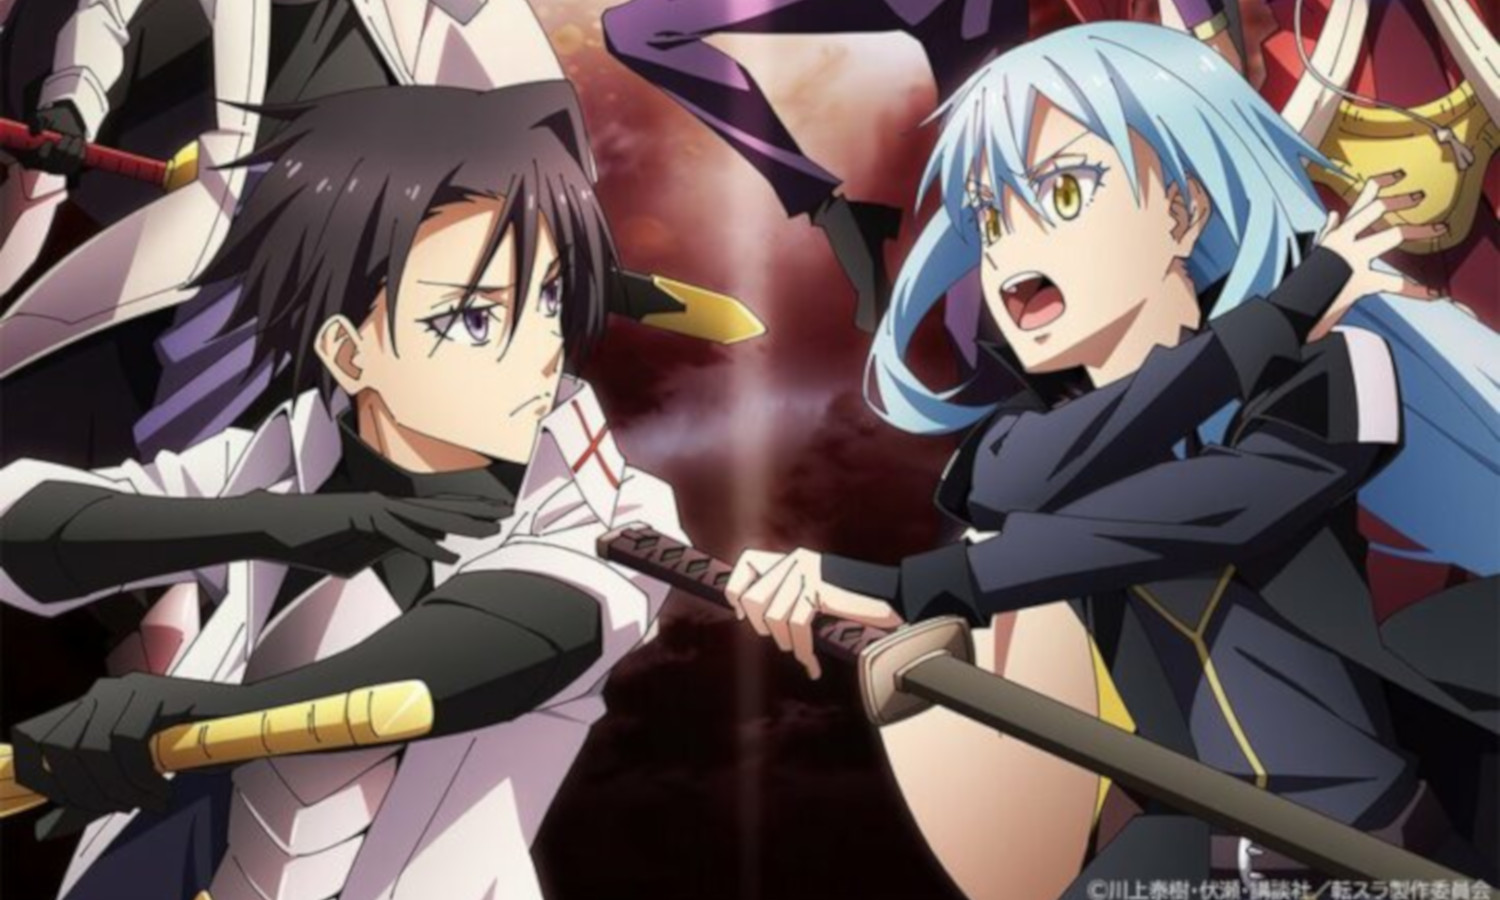 That Time I Got Reincarnated as a Slime saison 3 date de sortie initiale